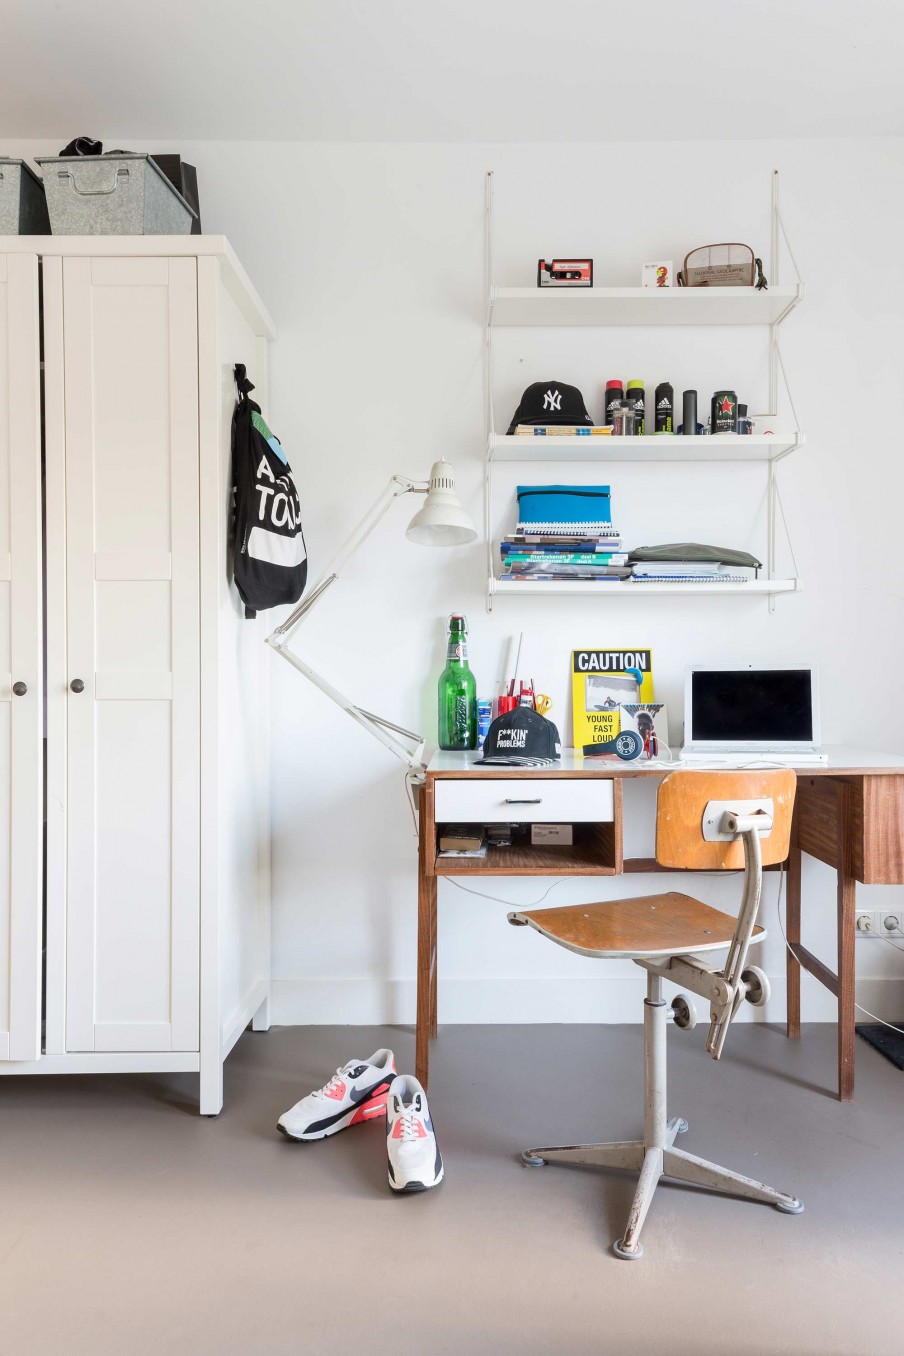 The home office corner is mid-century modern with shabby furniture